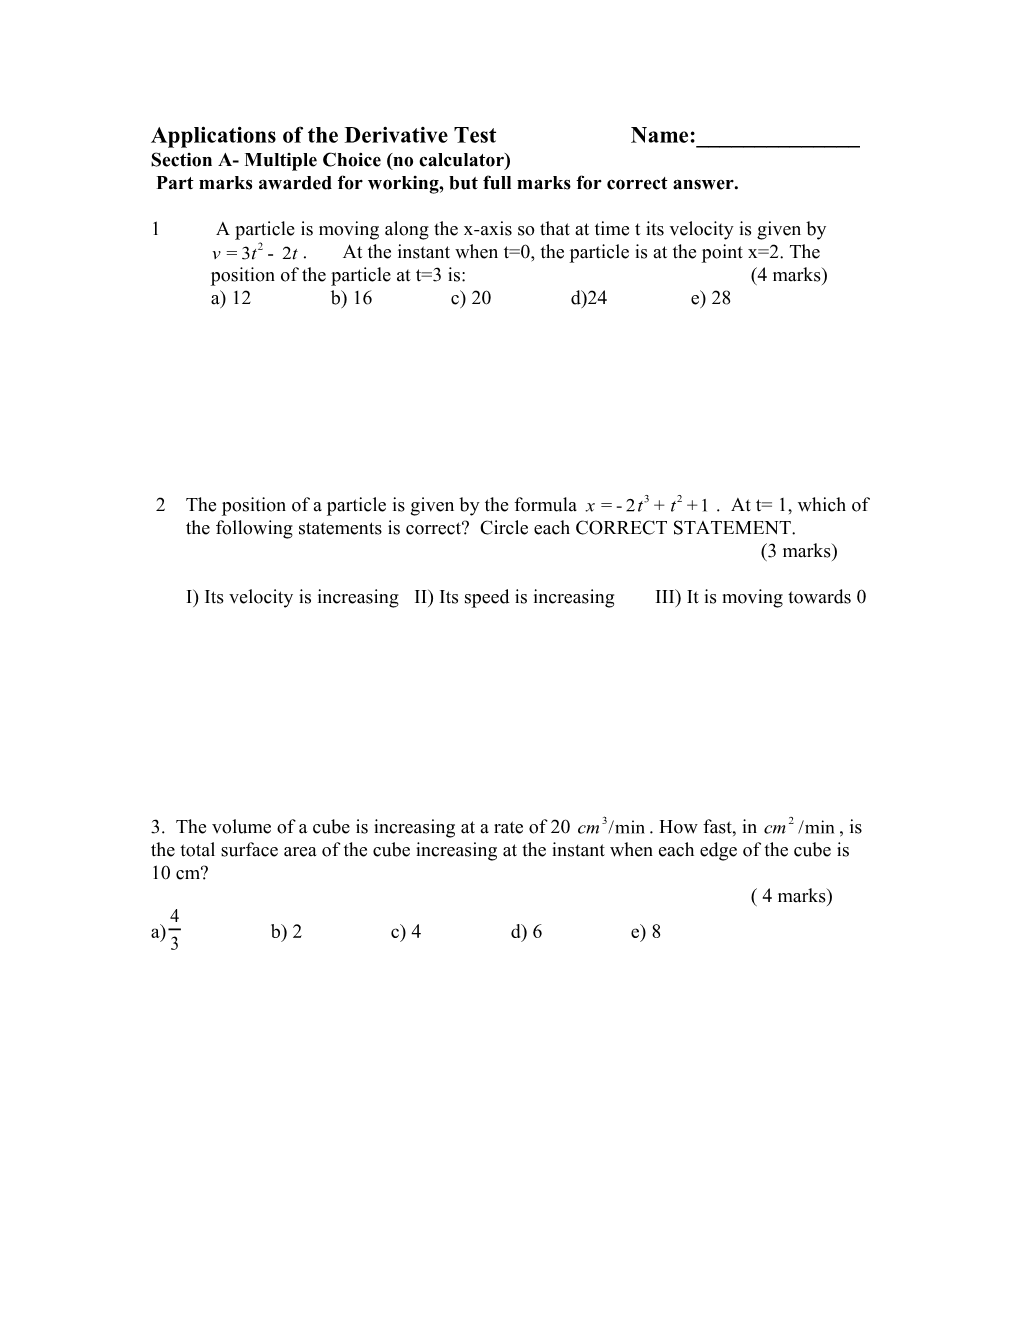 Applications of the Derivative Test